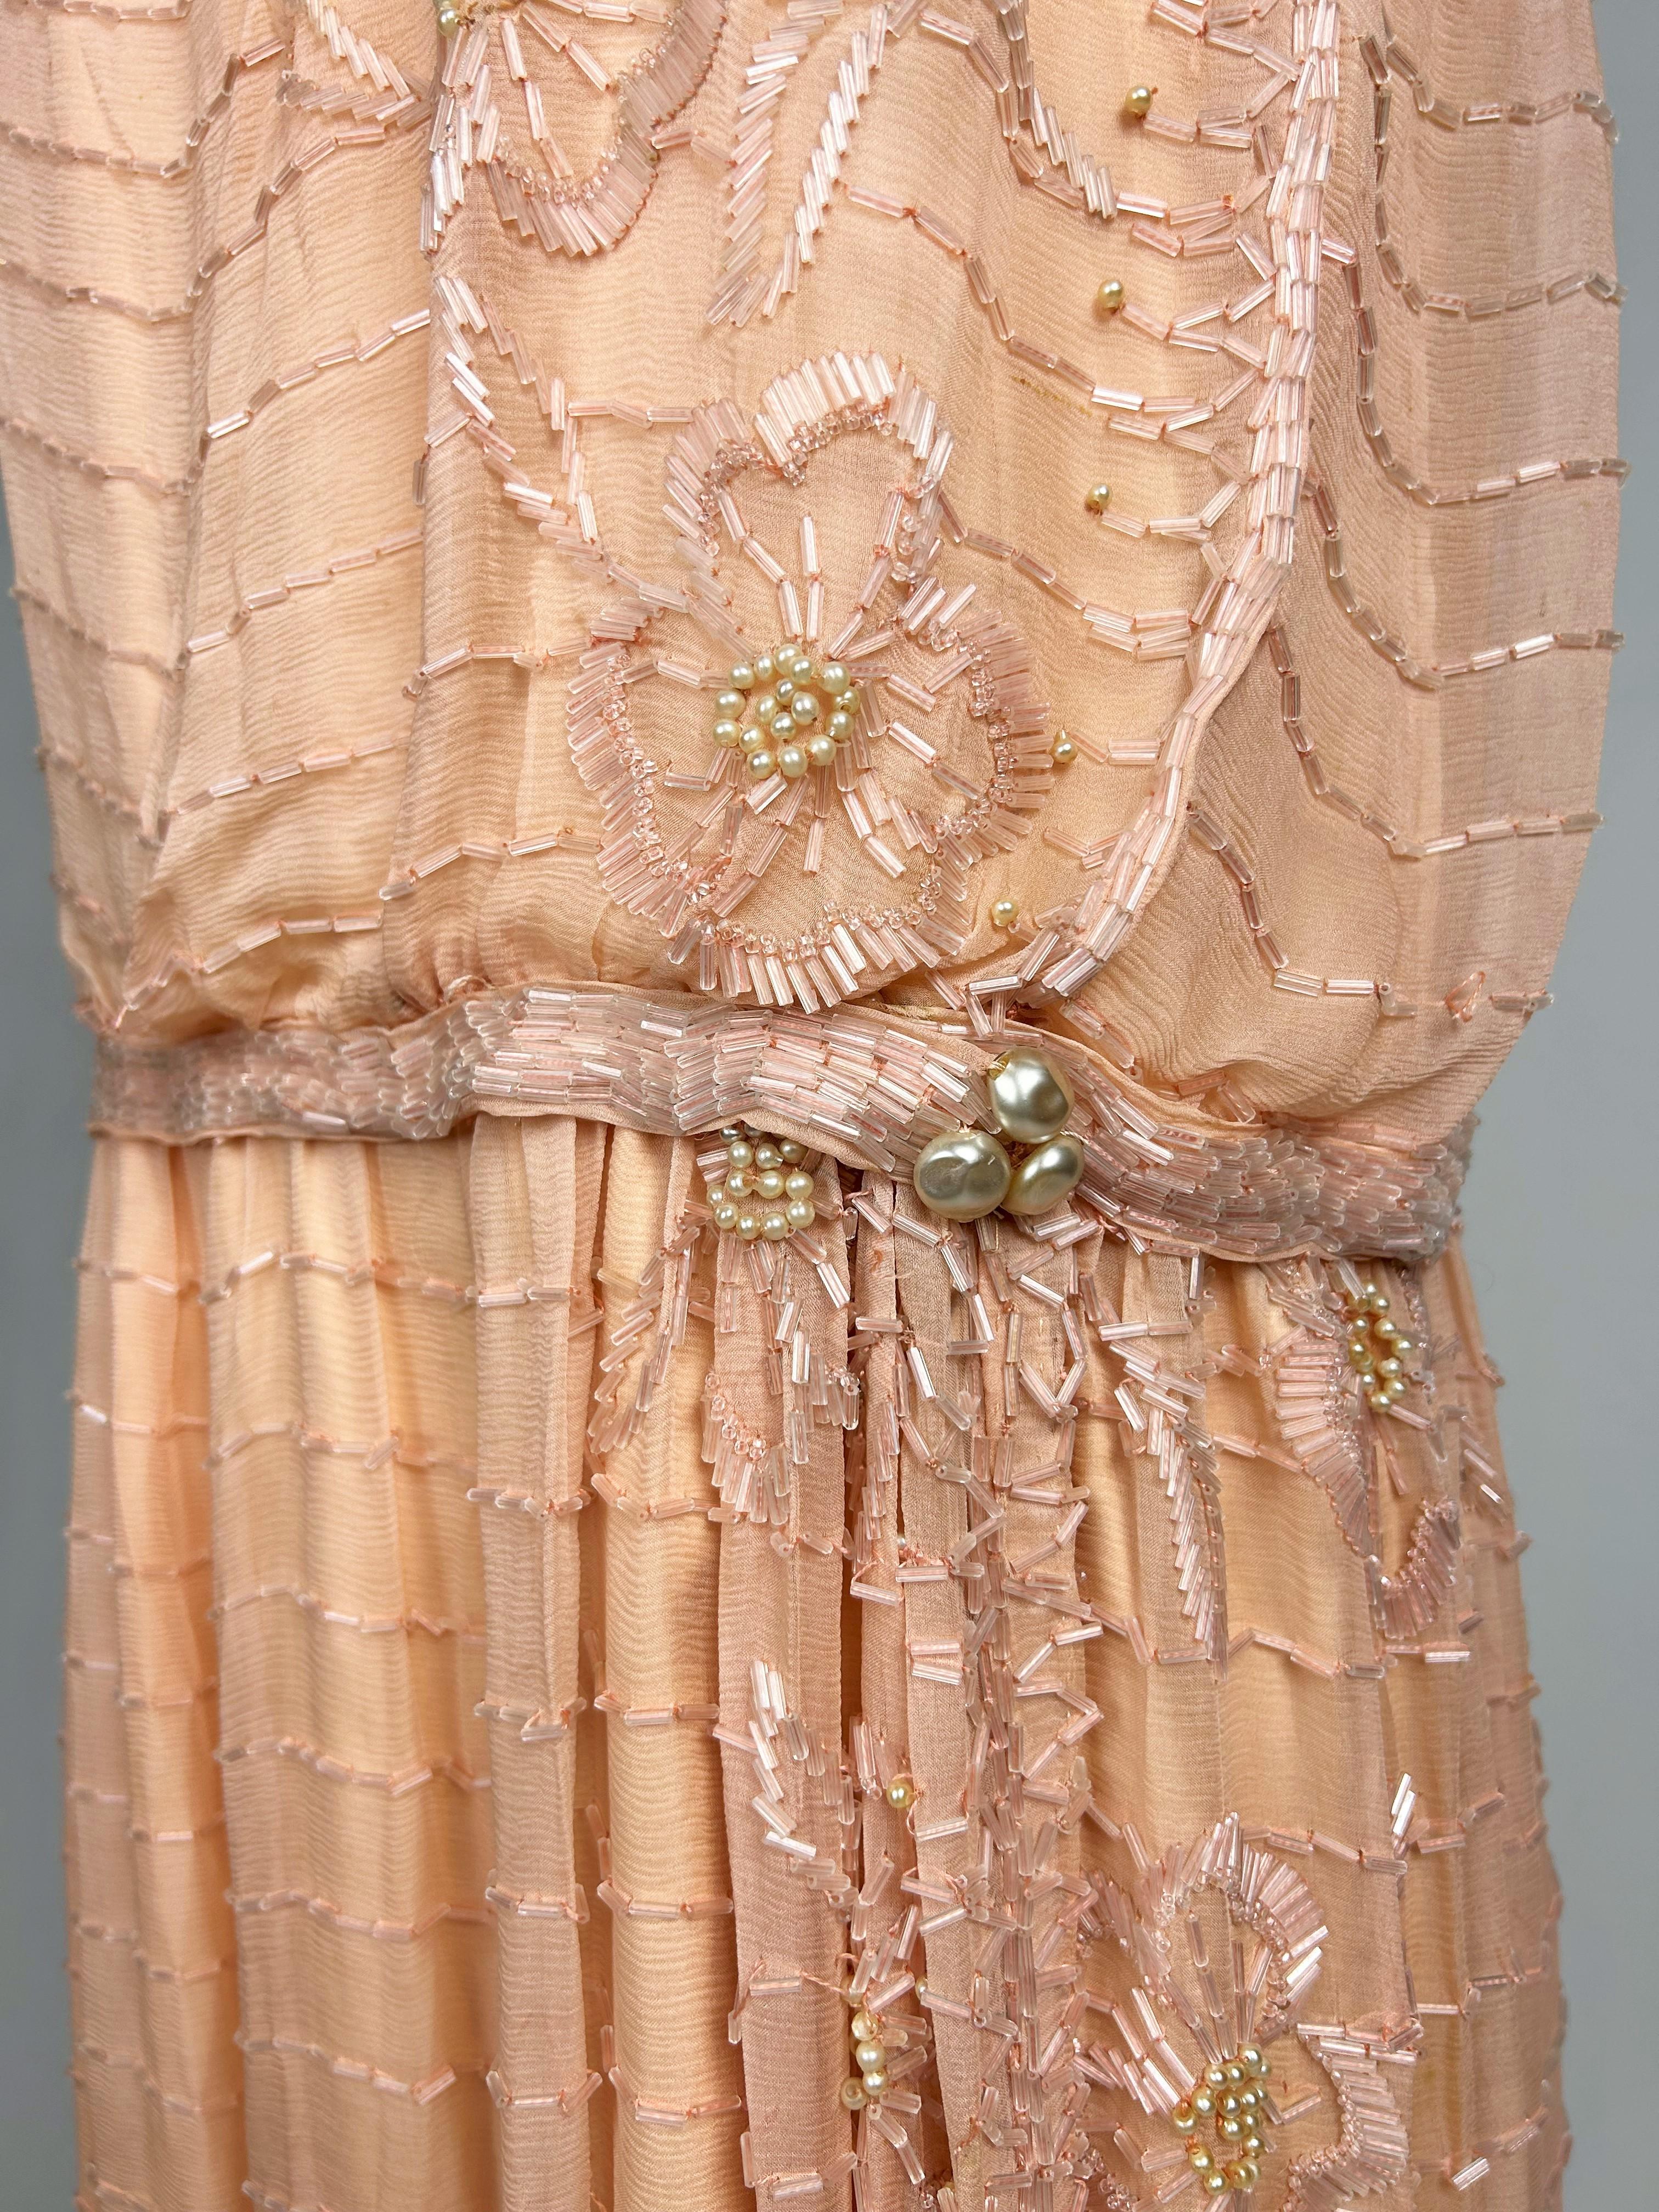 A Salmon embroidered Chiffon Flapper Dress - France Circa 1925 For Sale 4